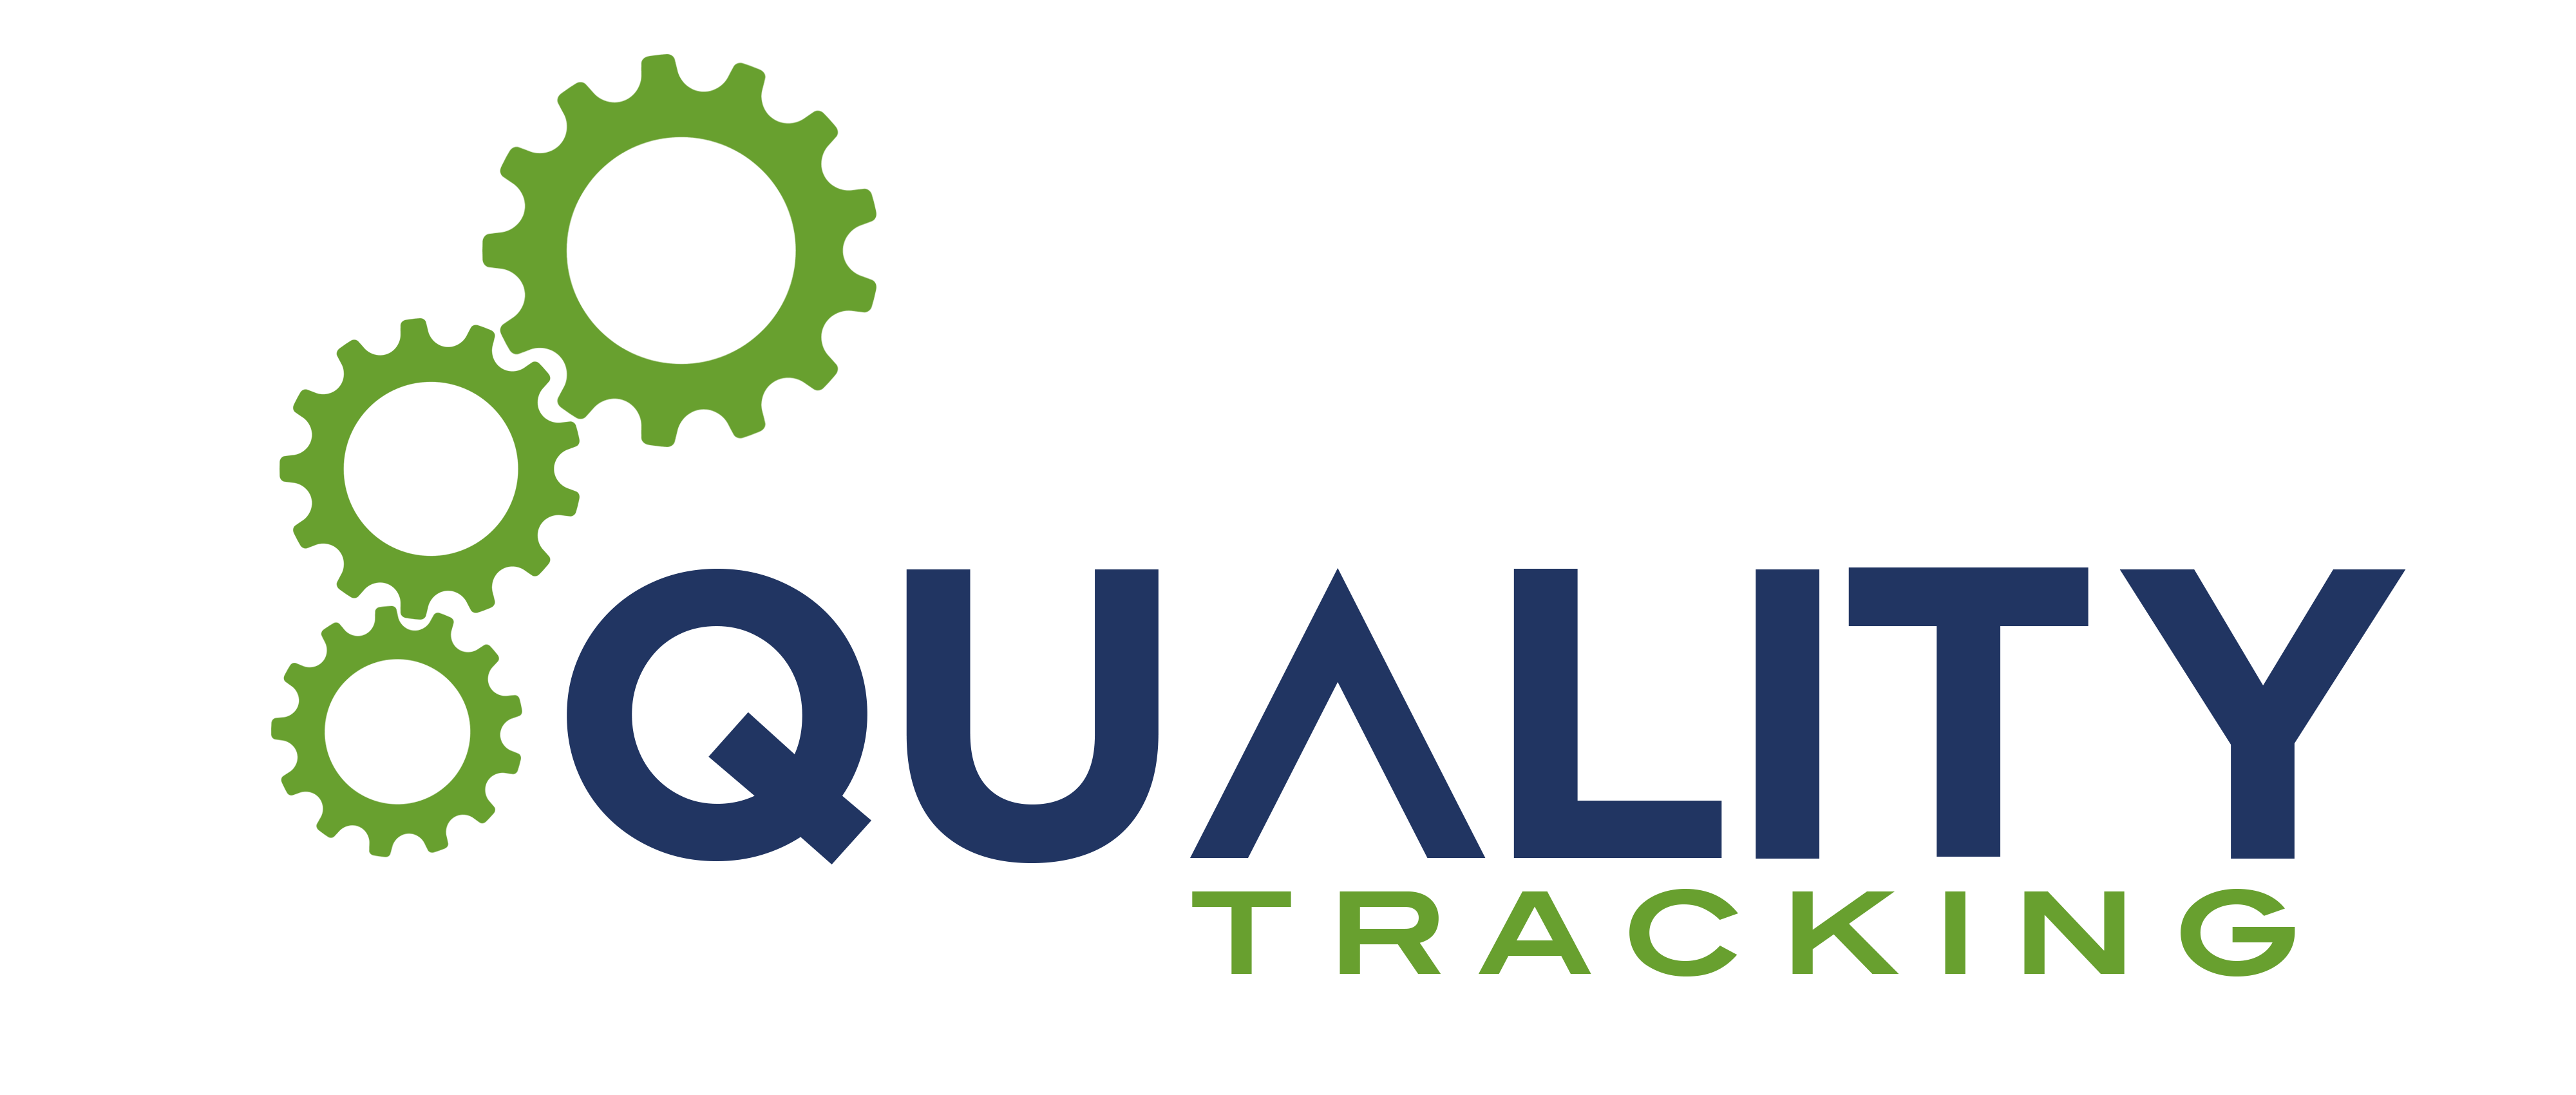 Tracking Logo - Quality Tracking | Taking your company to the next level